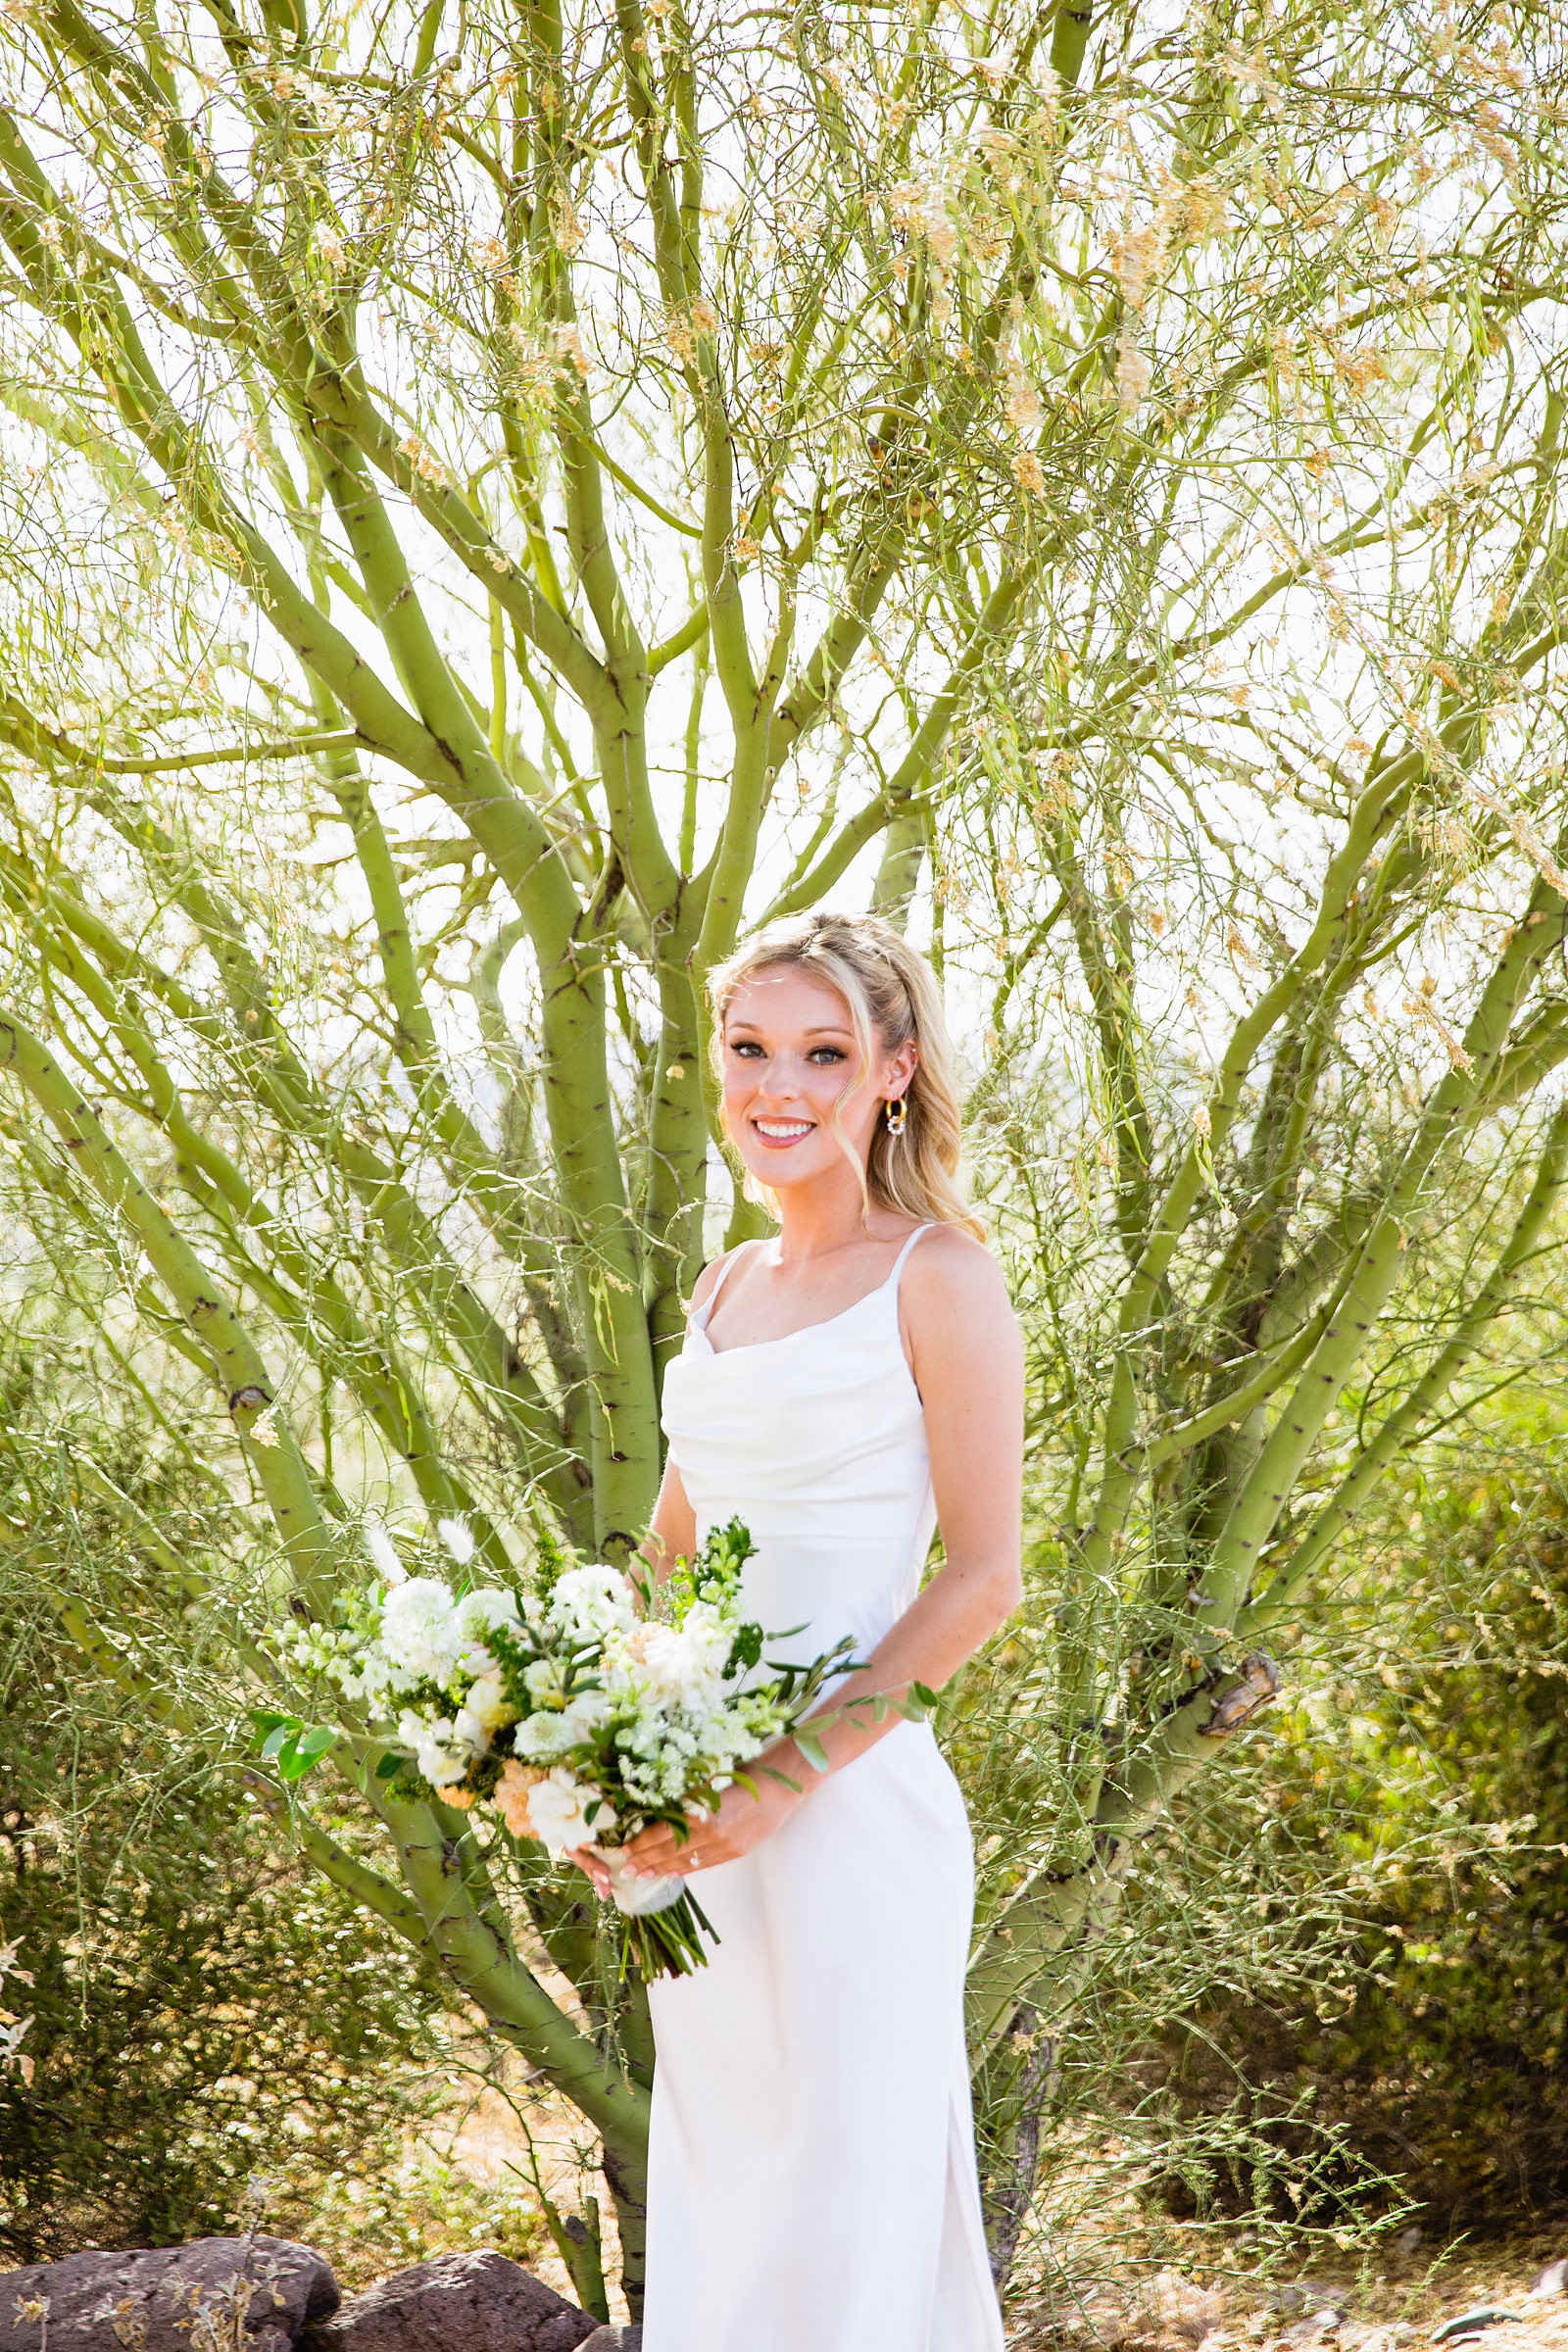 Bride's classic white sheath wedding dress for her Superstition Mountain Micro wedding by PMA Photography.